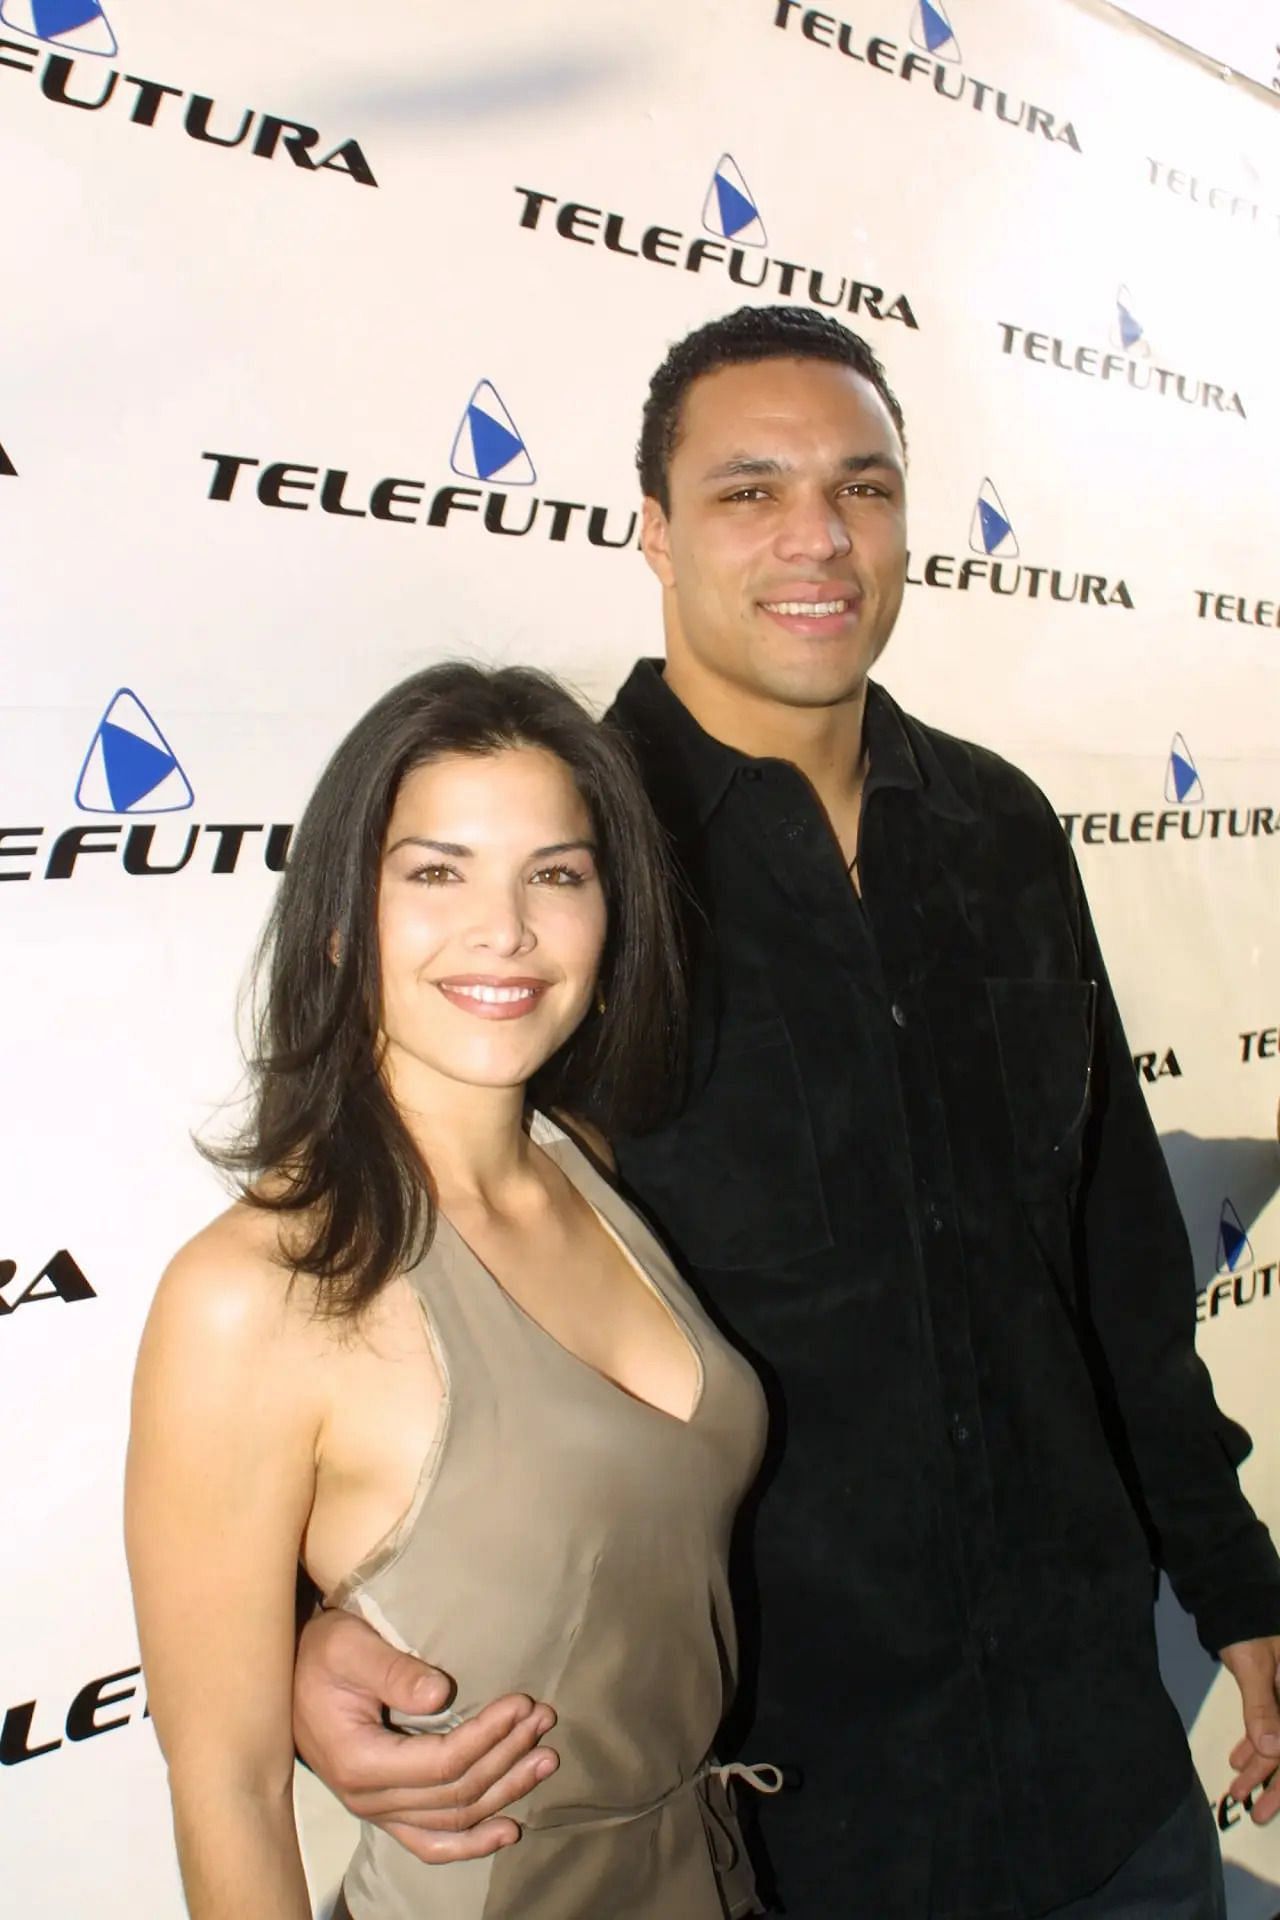 Lauren Sanchez with her ex-husband Tony Gonzales in 2002 (Image courtesy of Page Six)